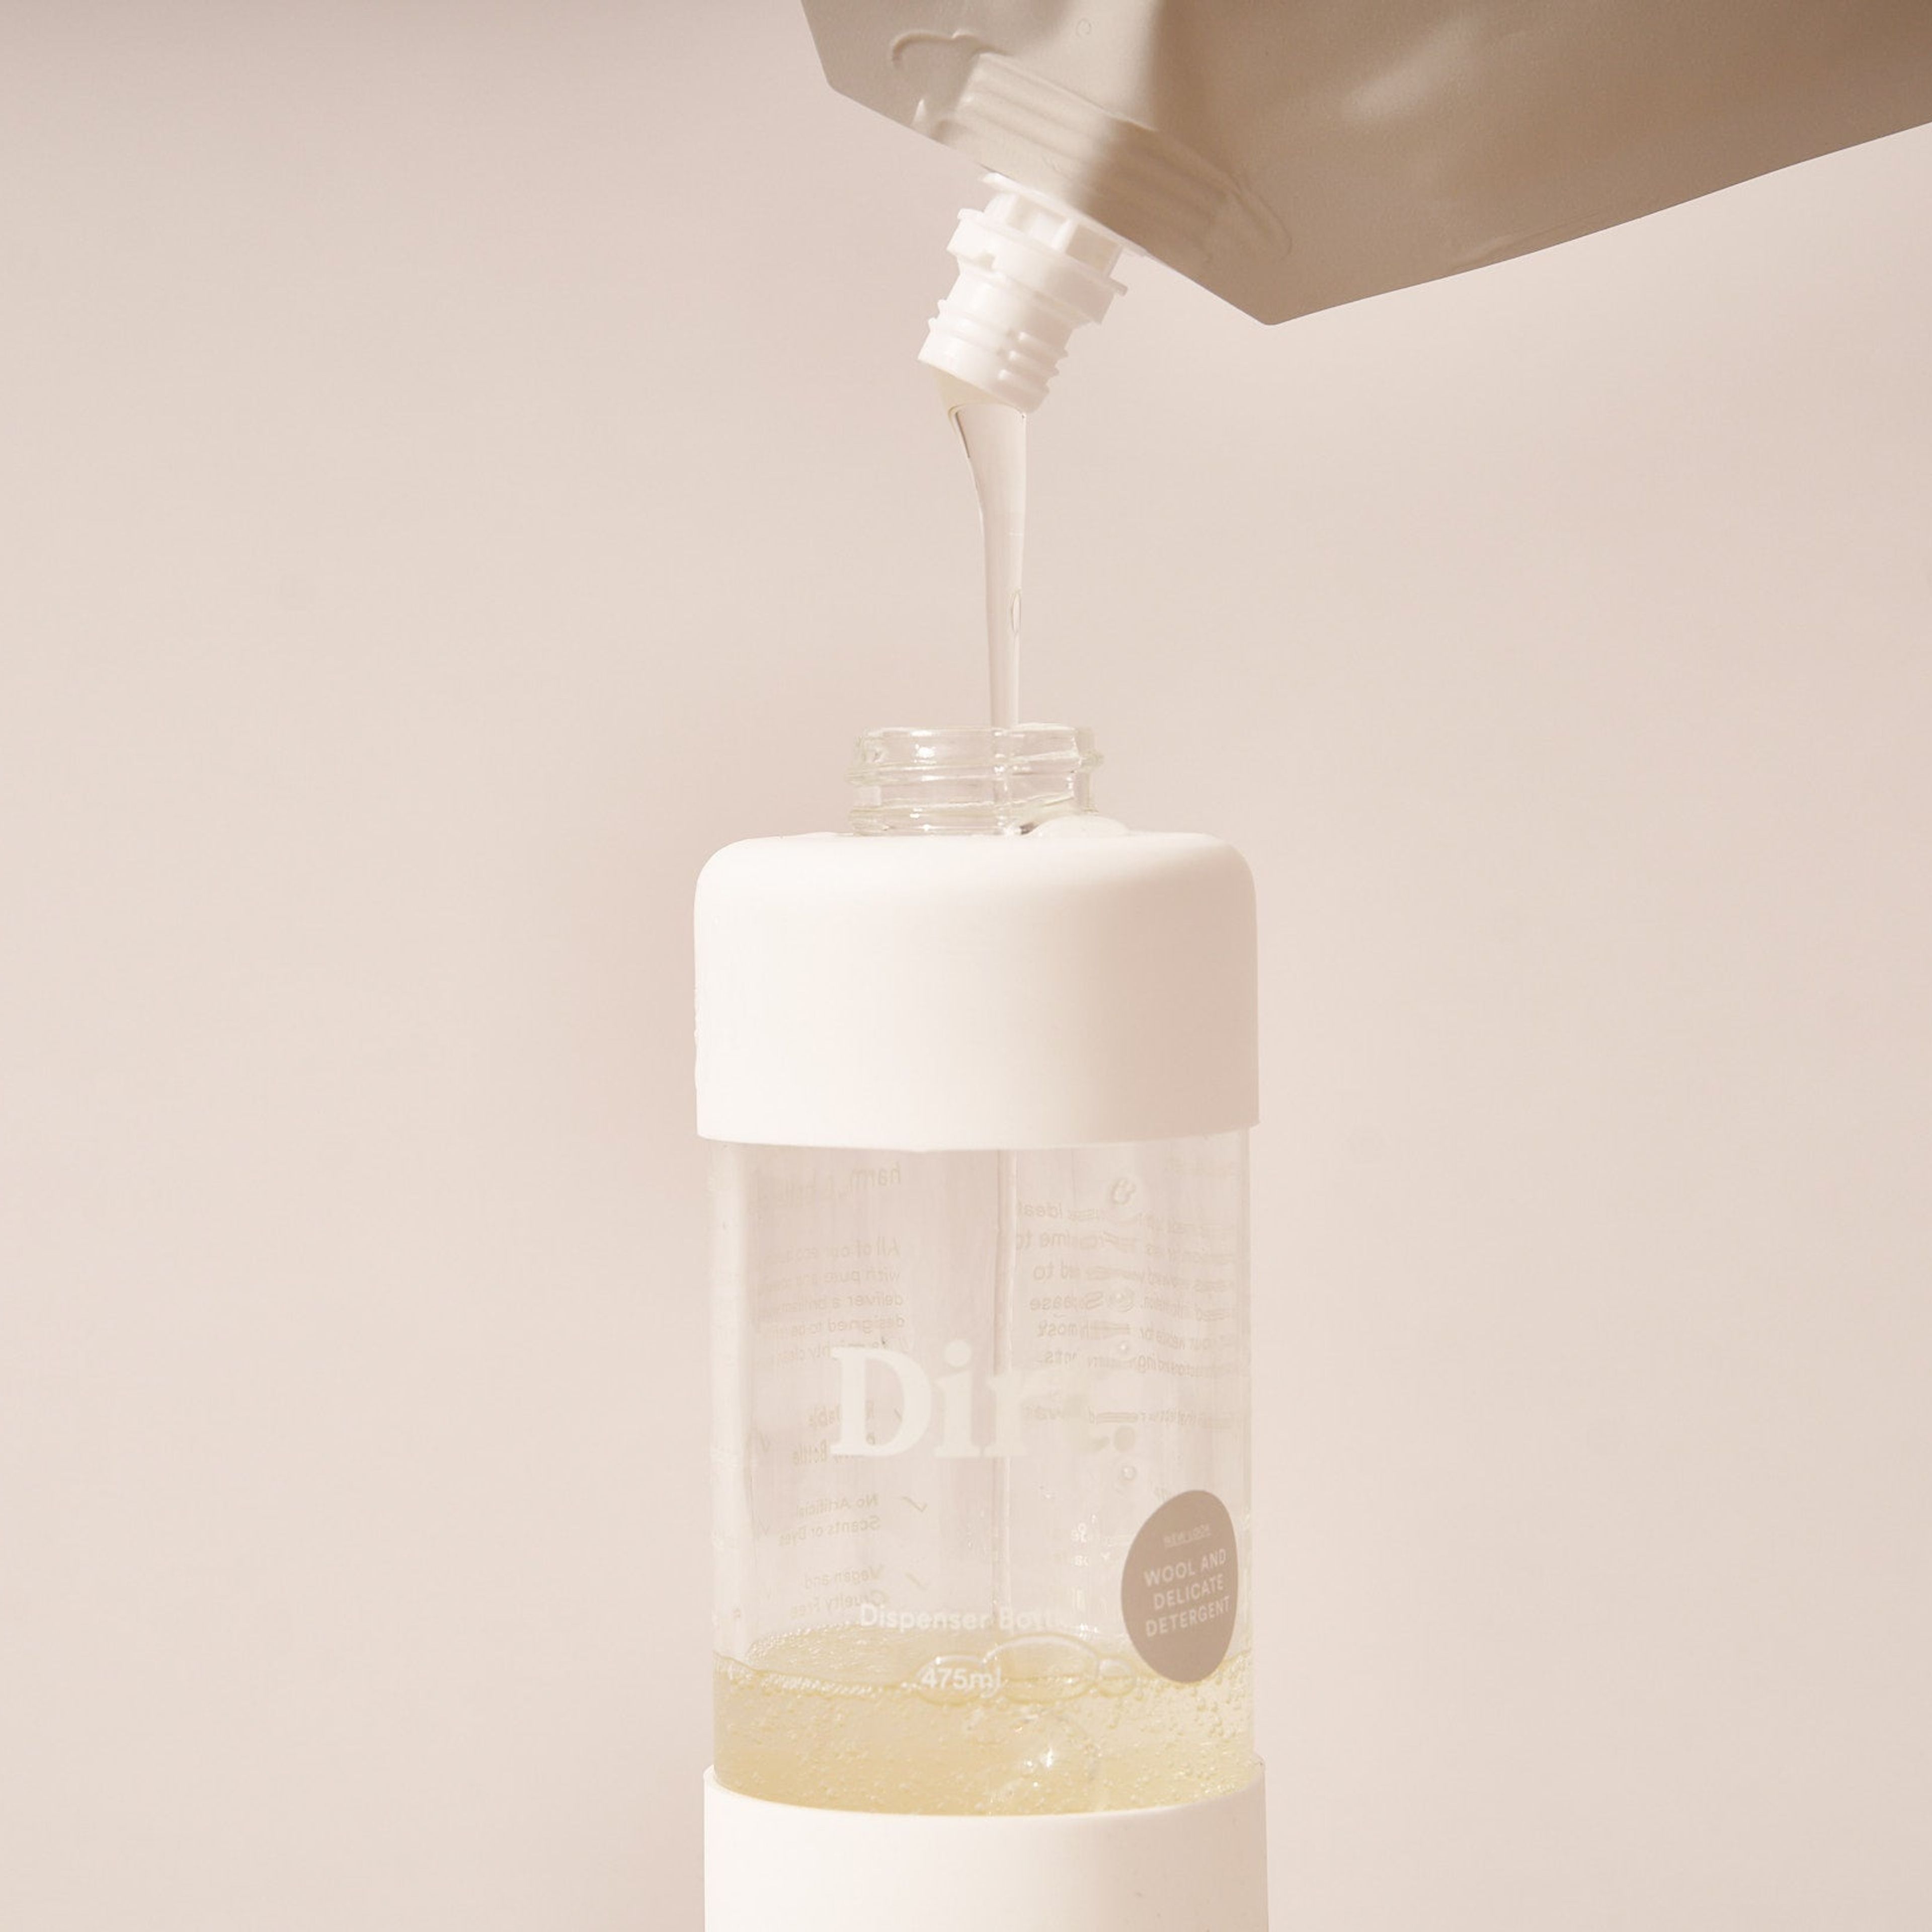 Wool and Delicate Wash Dispenser Bottle